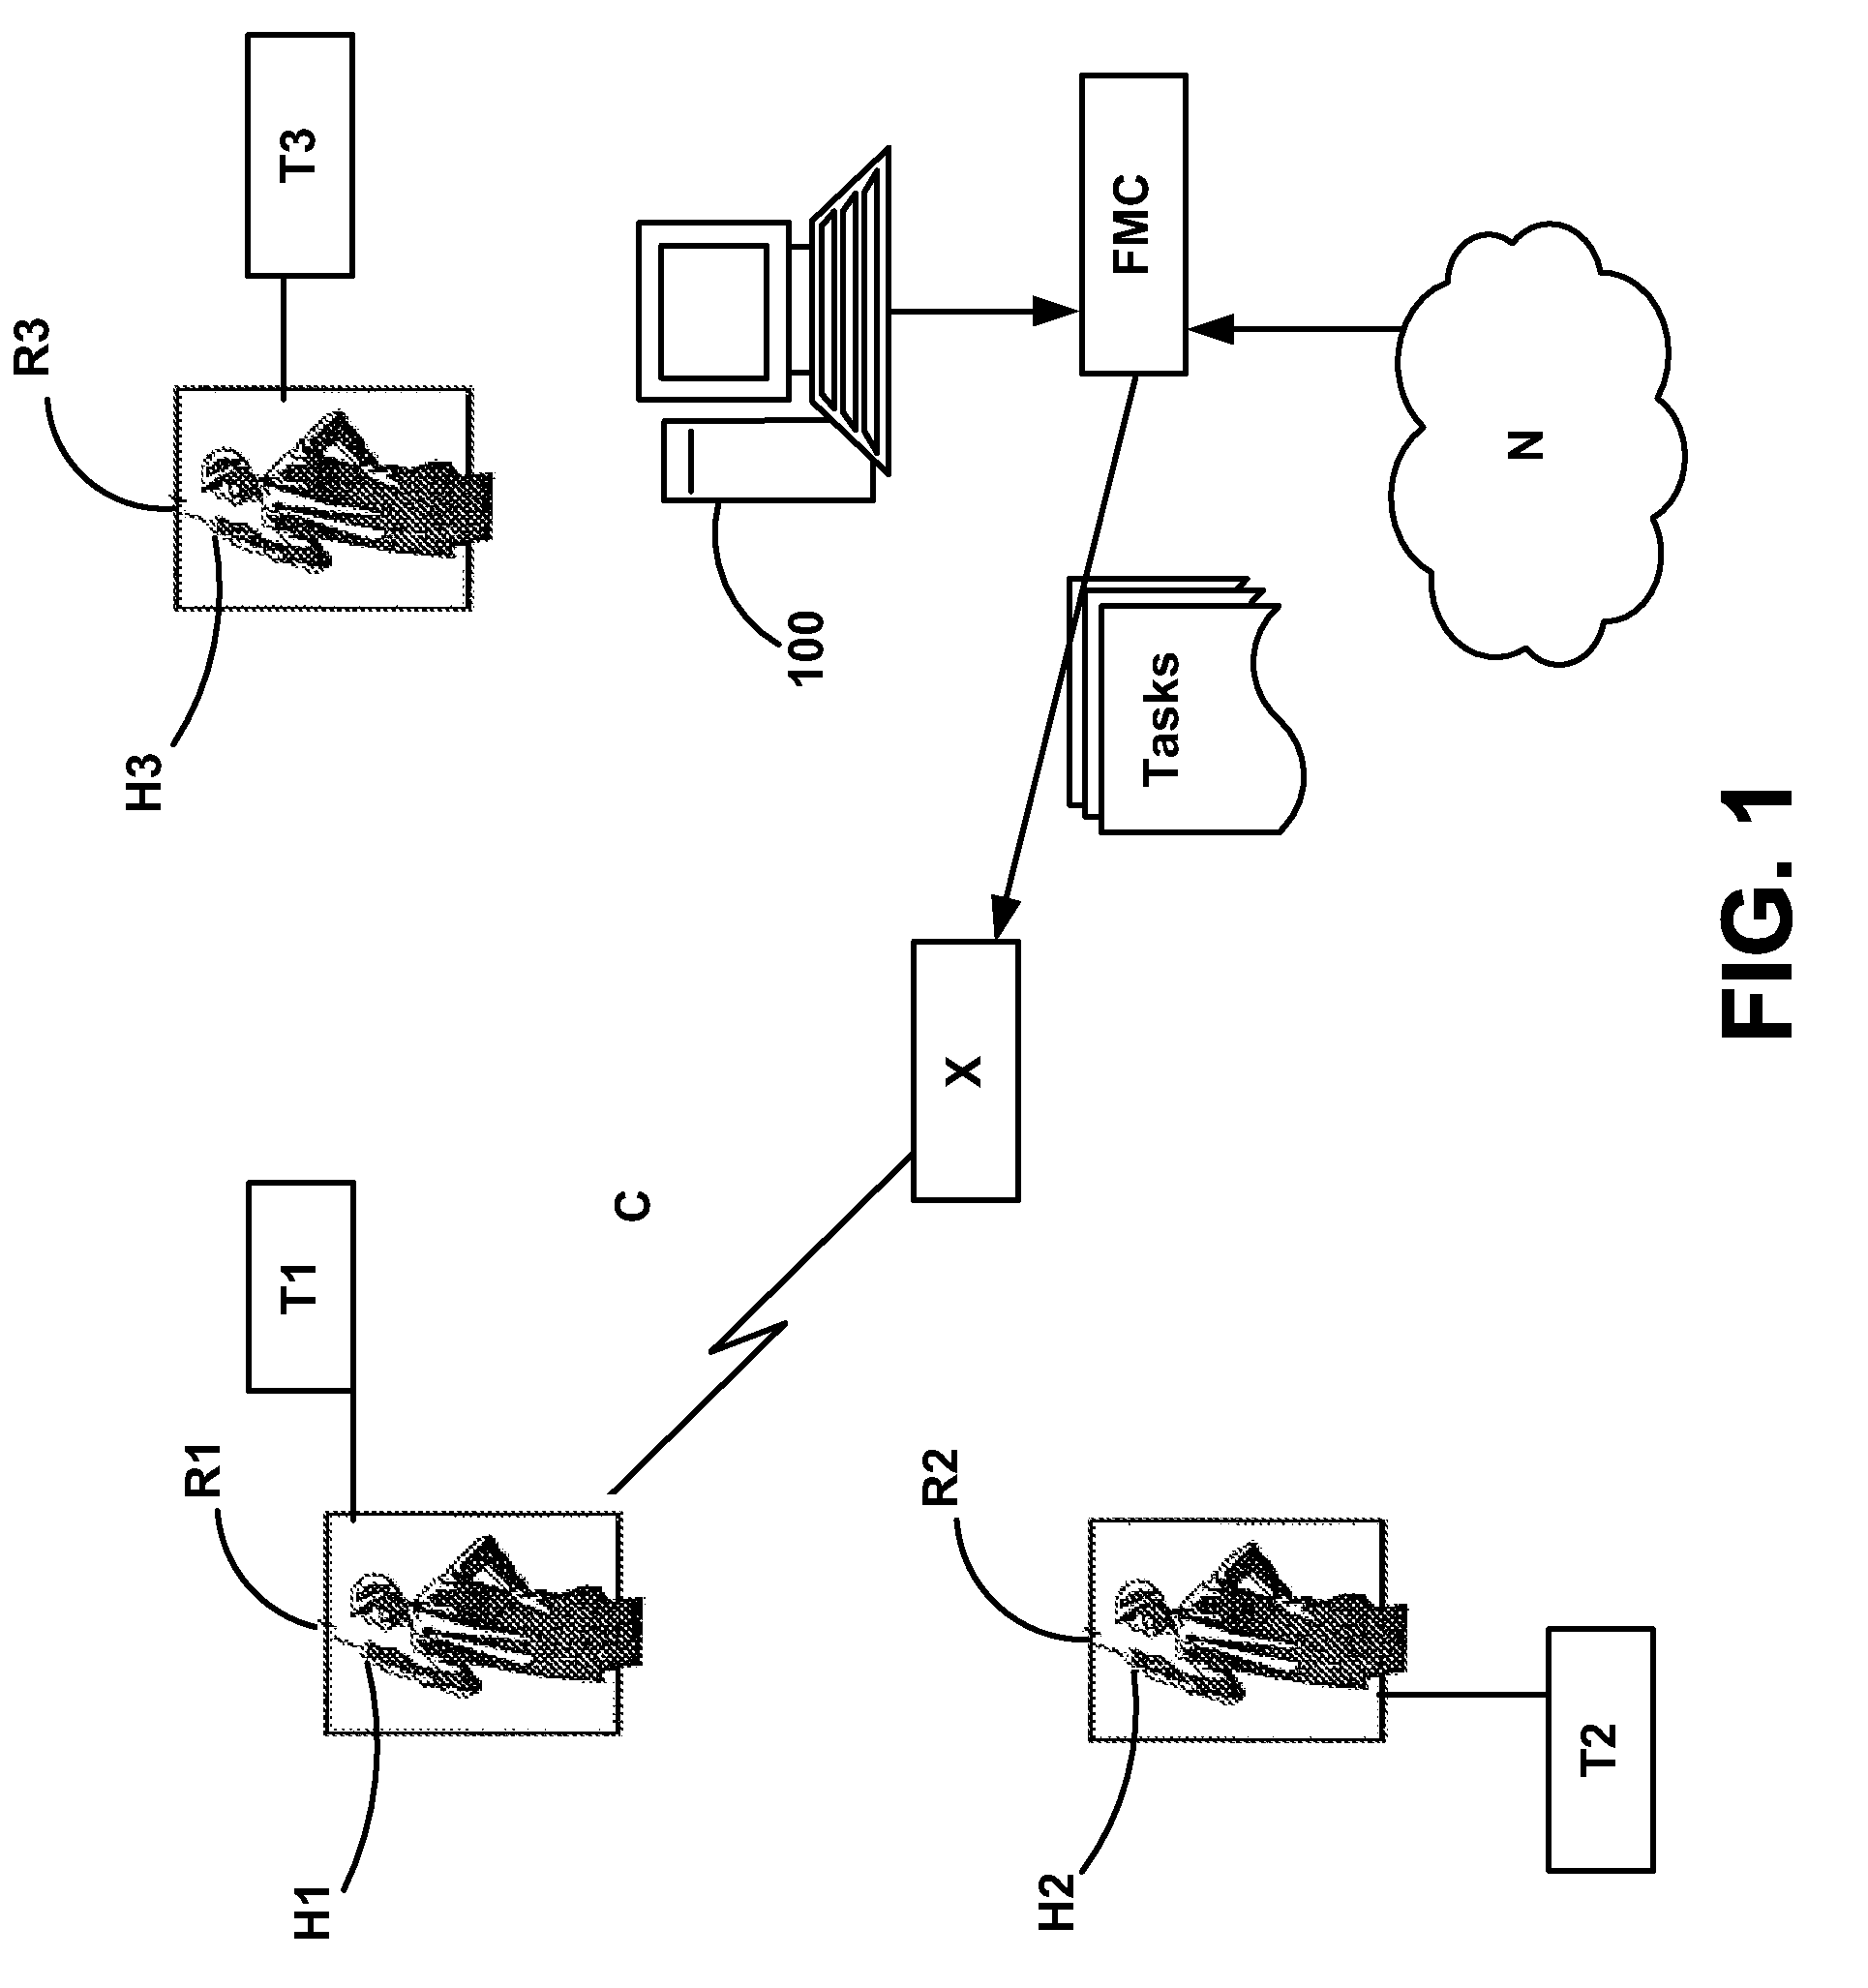 Resource scheduling apparatus and method